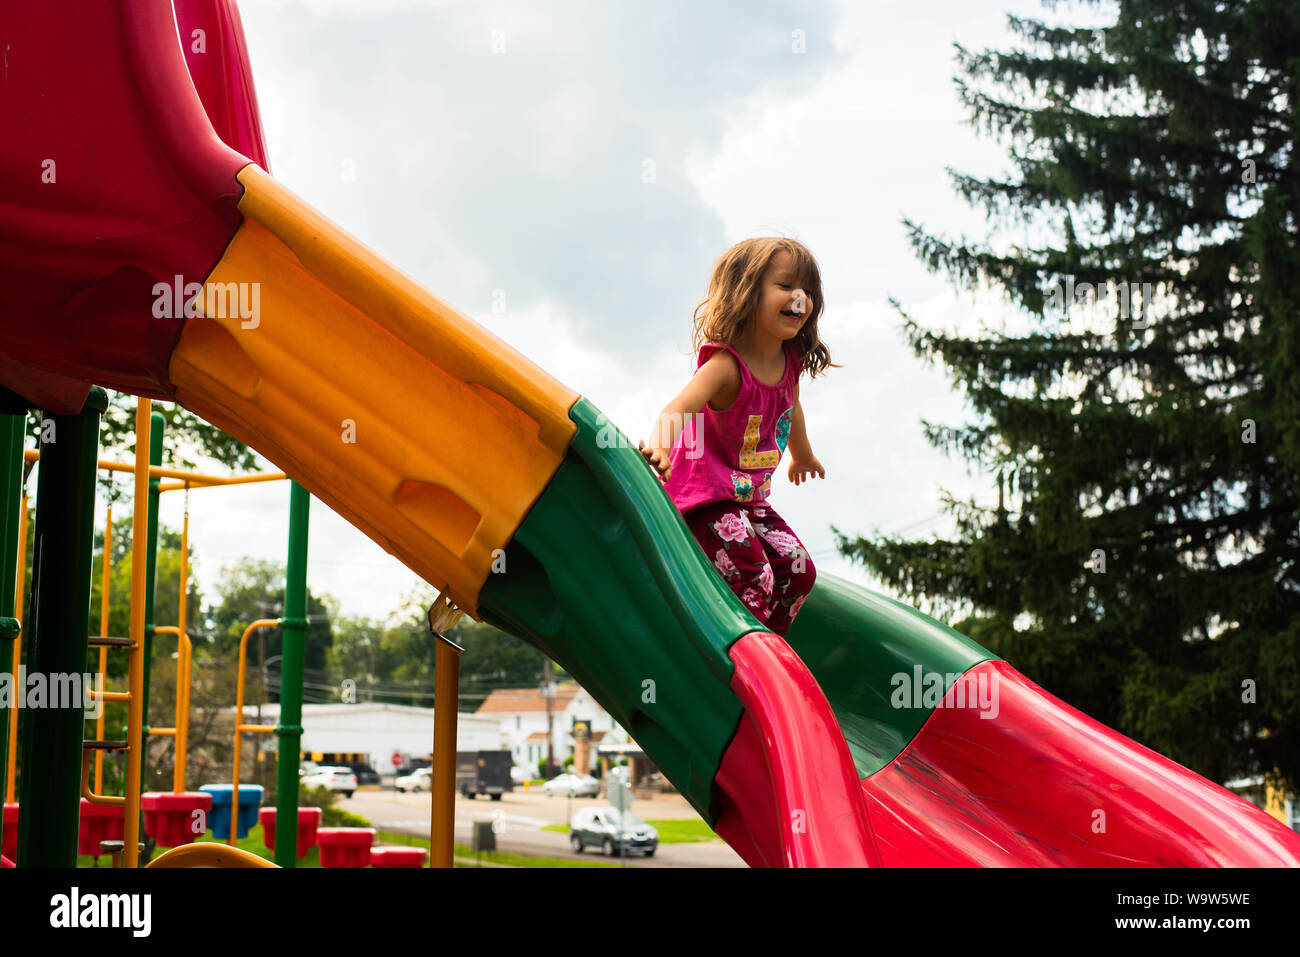 A 4-year old girl on a colorful slide on a playground. Stock Photo